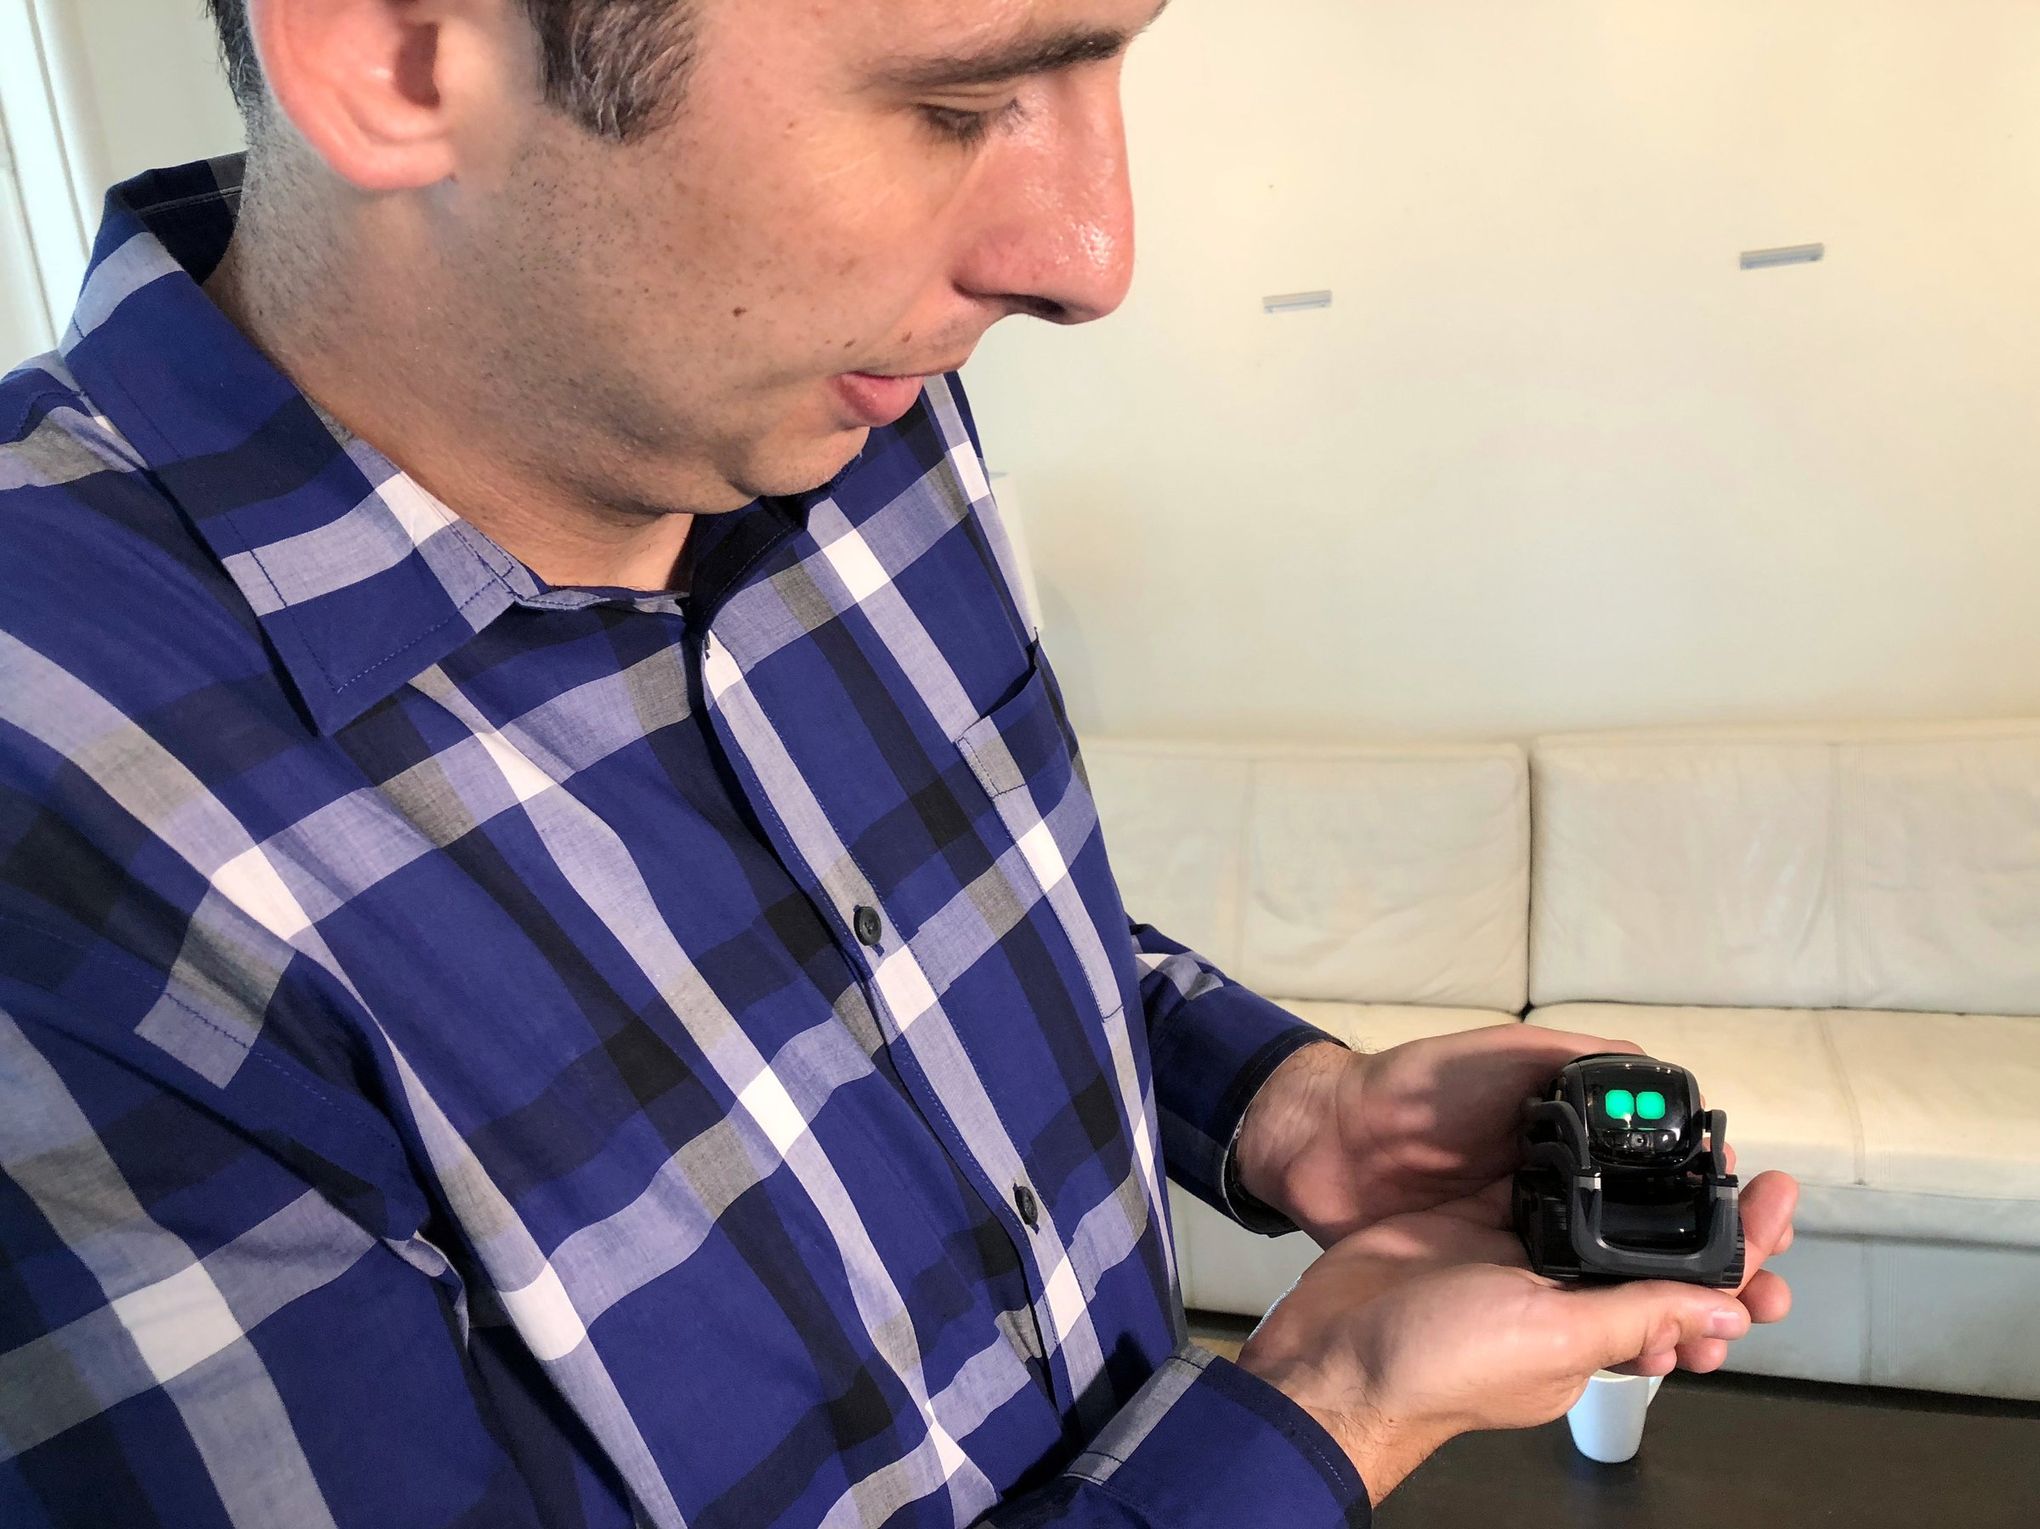 Hands-on with Vector, Anki's new emotive home assistant robot